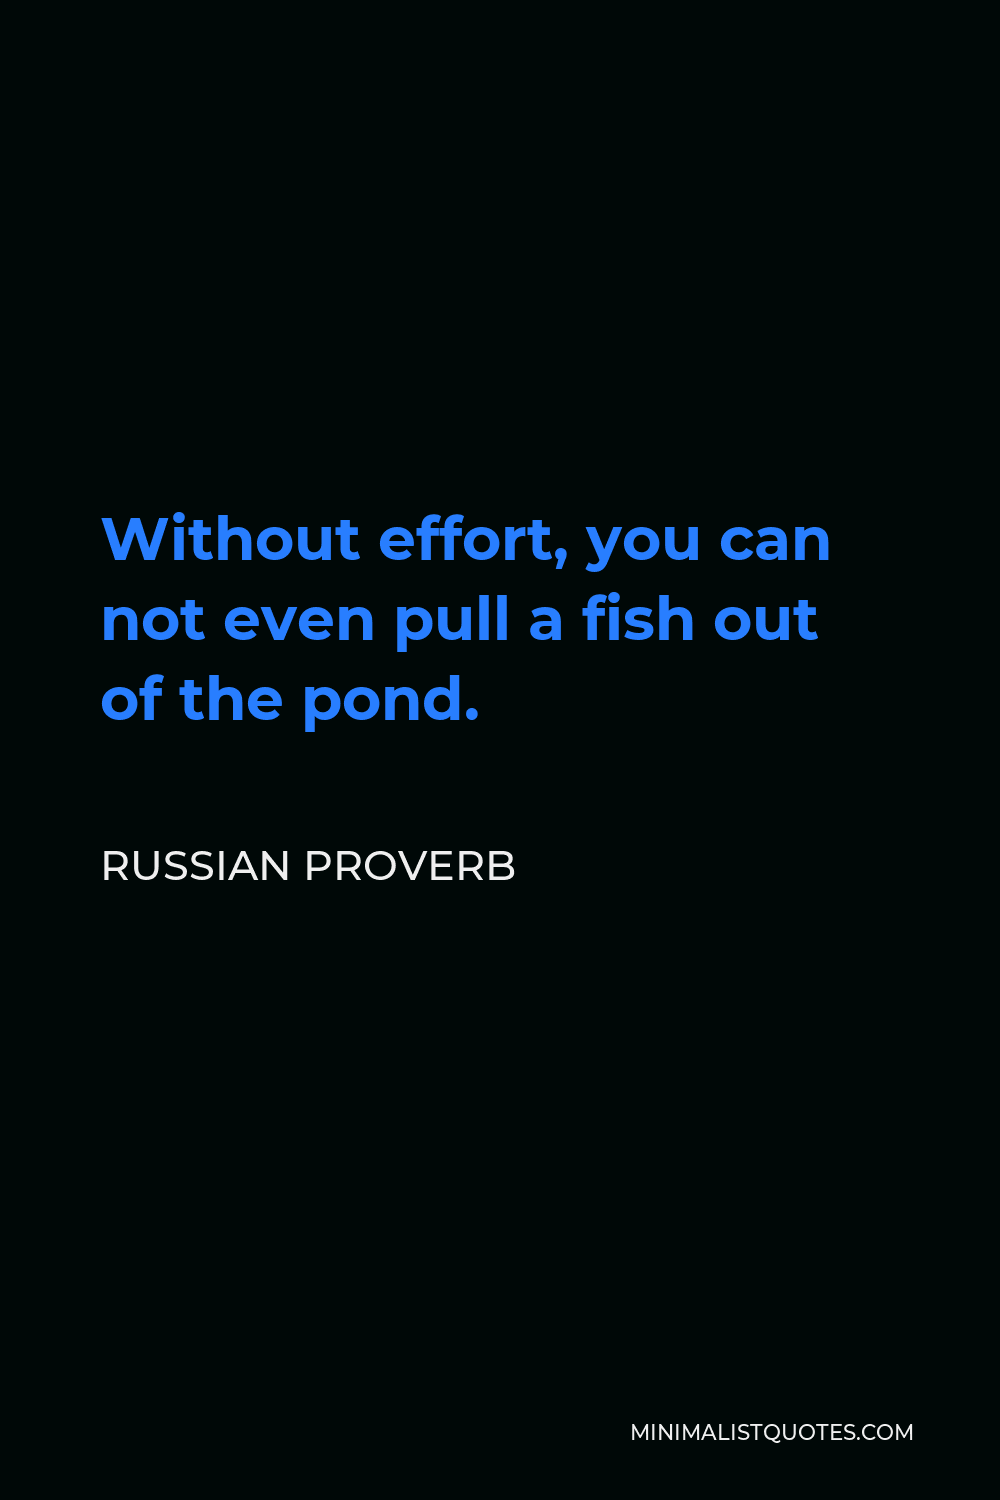 Russian Proverb Quote - Without effort, you can not even pull a fish out of the pond.